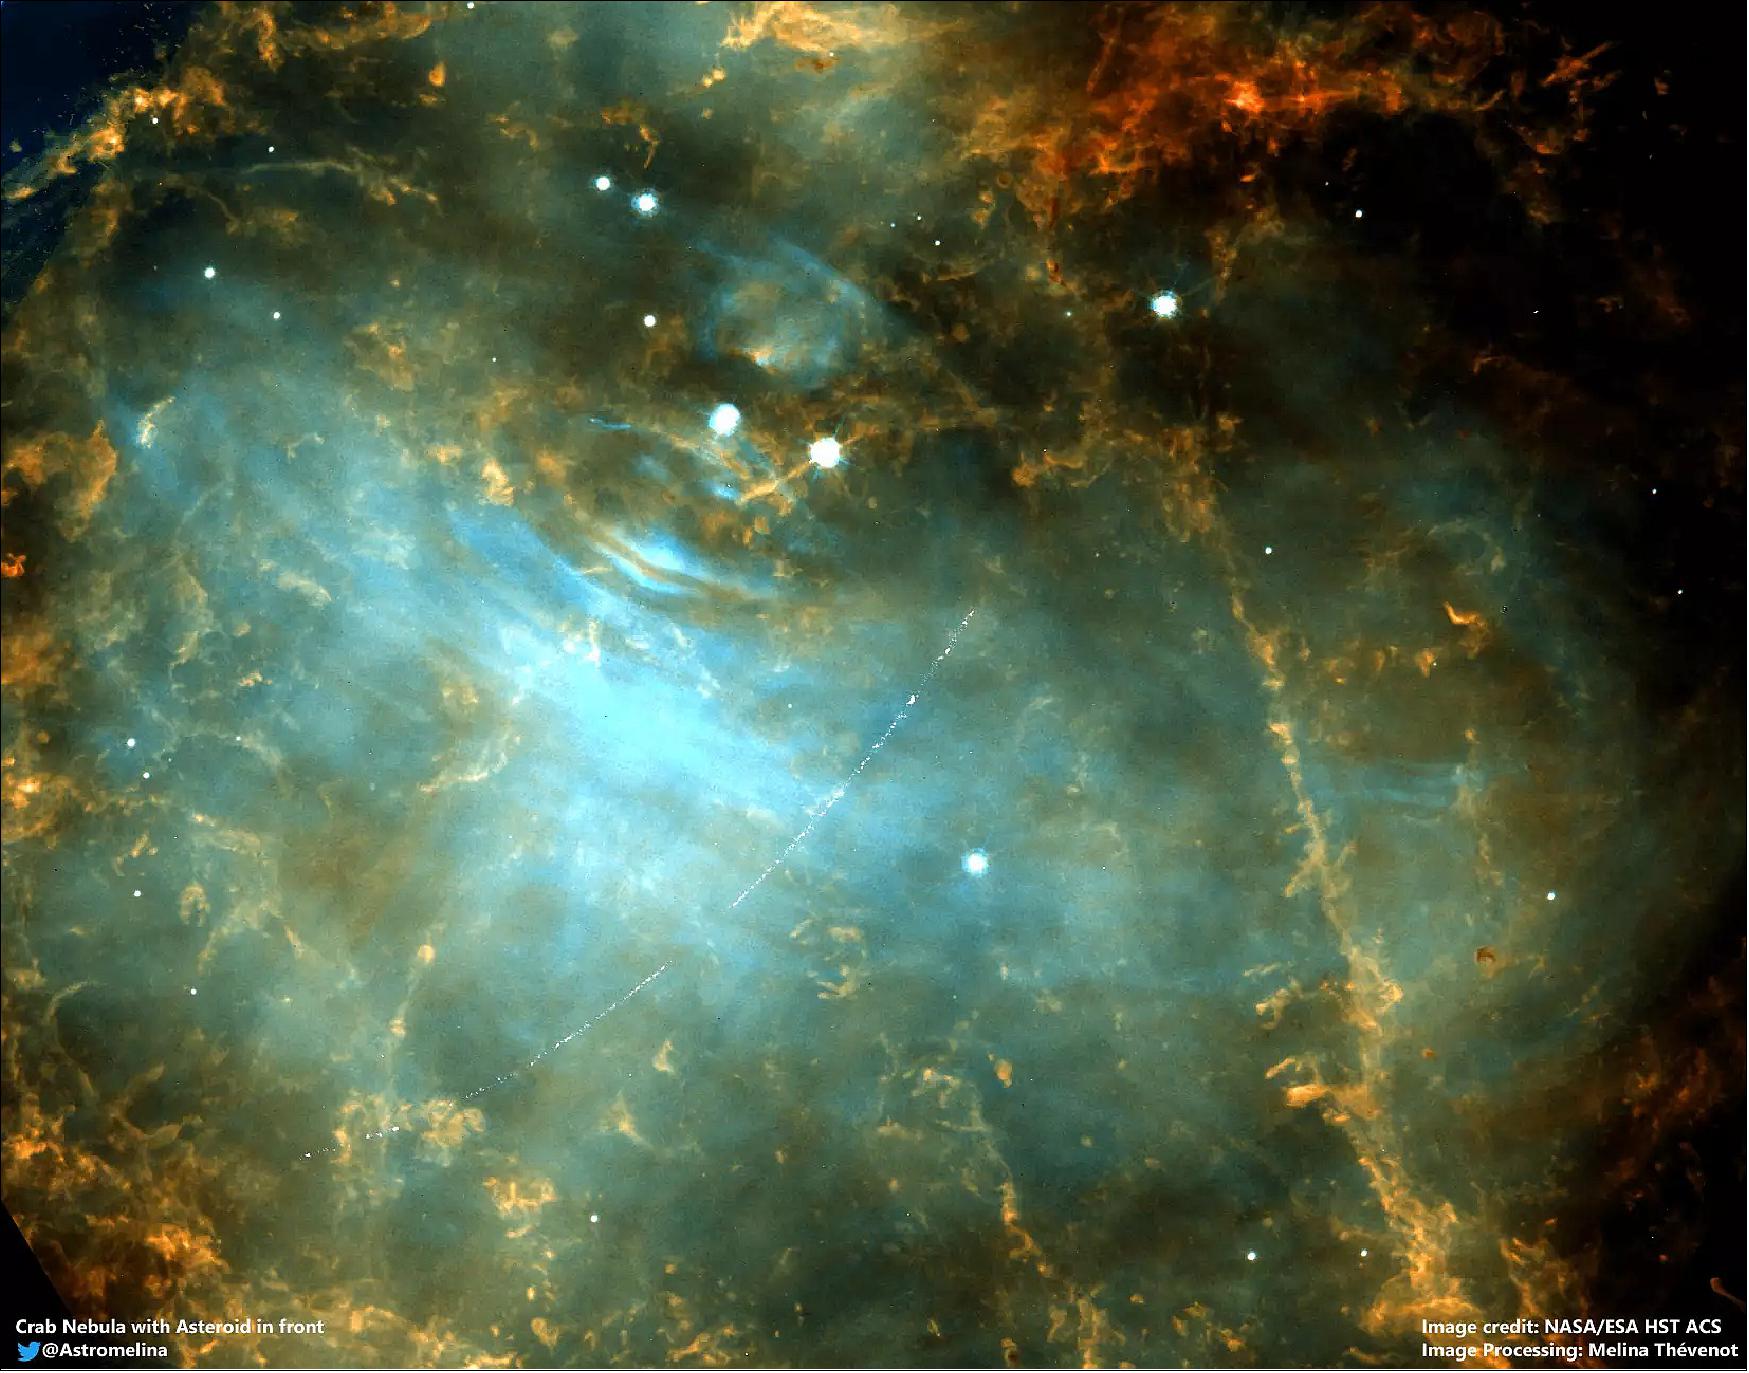 Figure 46: In this Hubble observation taken on 5 December 2005 the Main Belt asteroid 2001 SE101 passes in front of the Crab Nebula (image credit: NASA/ESA HST, Image processing: Melina Thévenot)